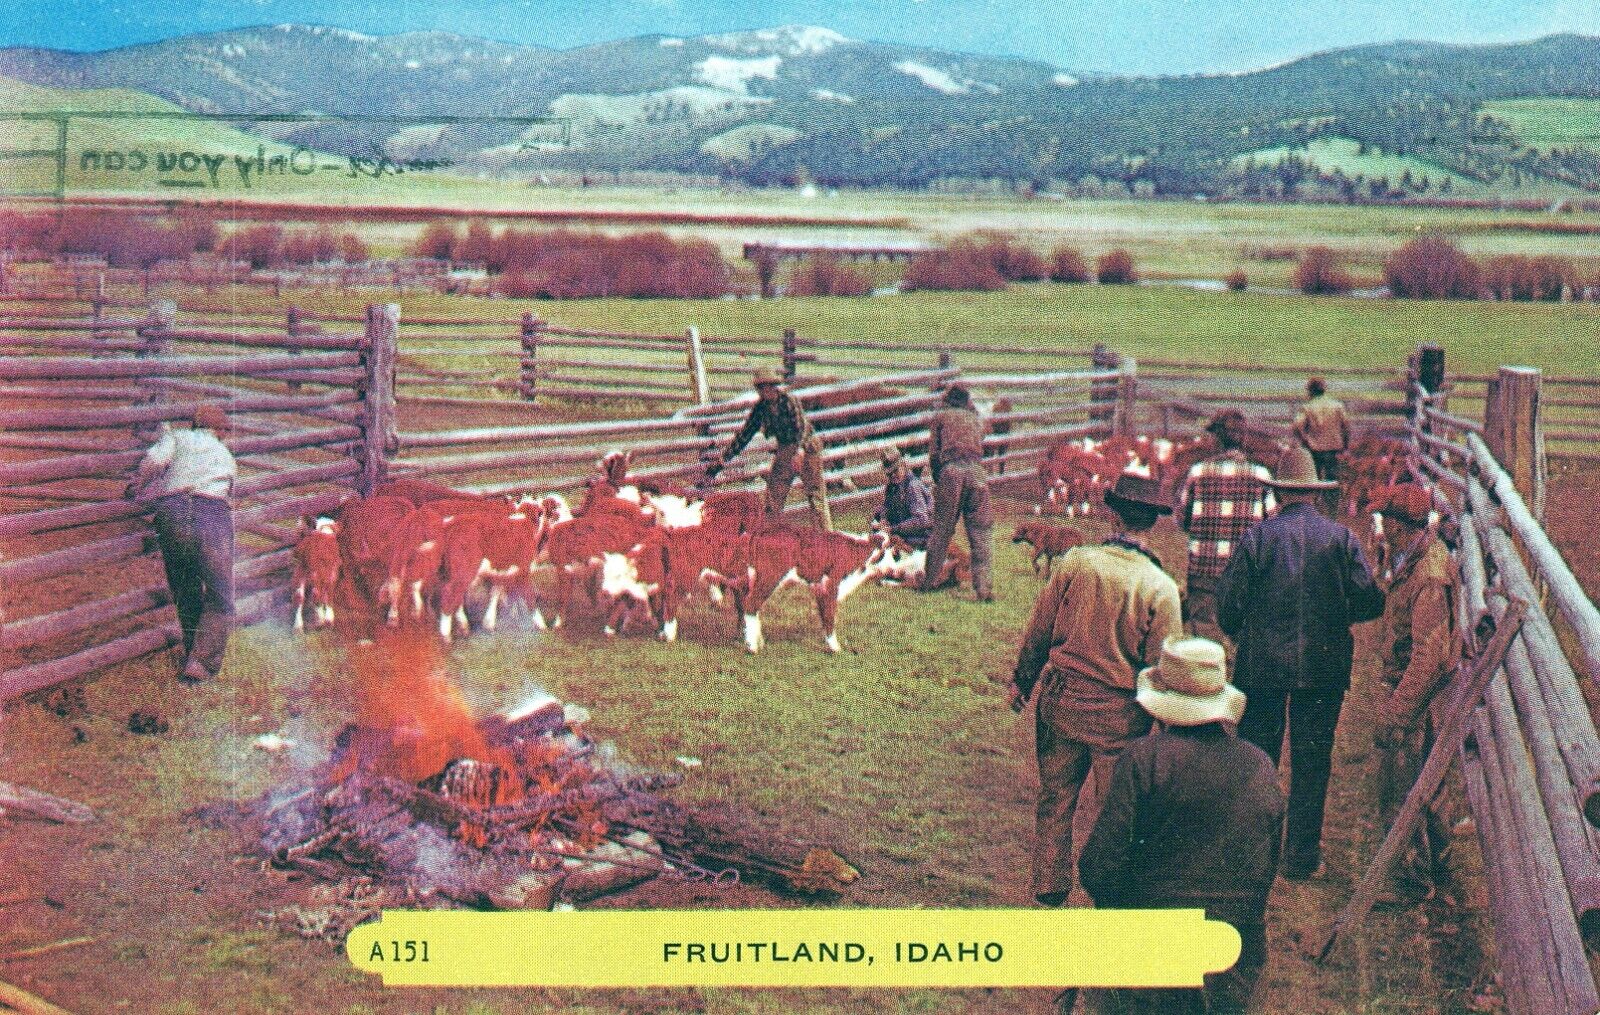 Fruitland Idaho Cattle And Farmers Posted in 1953 Chrome Postcard